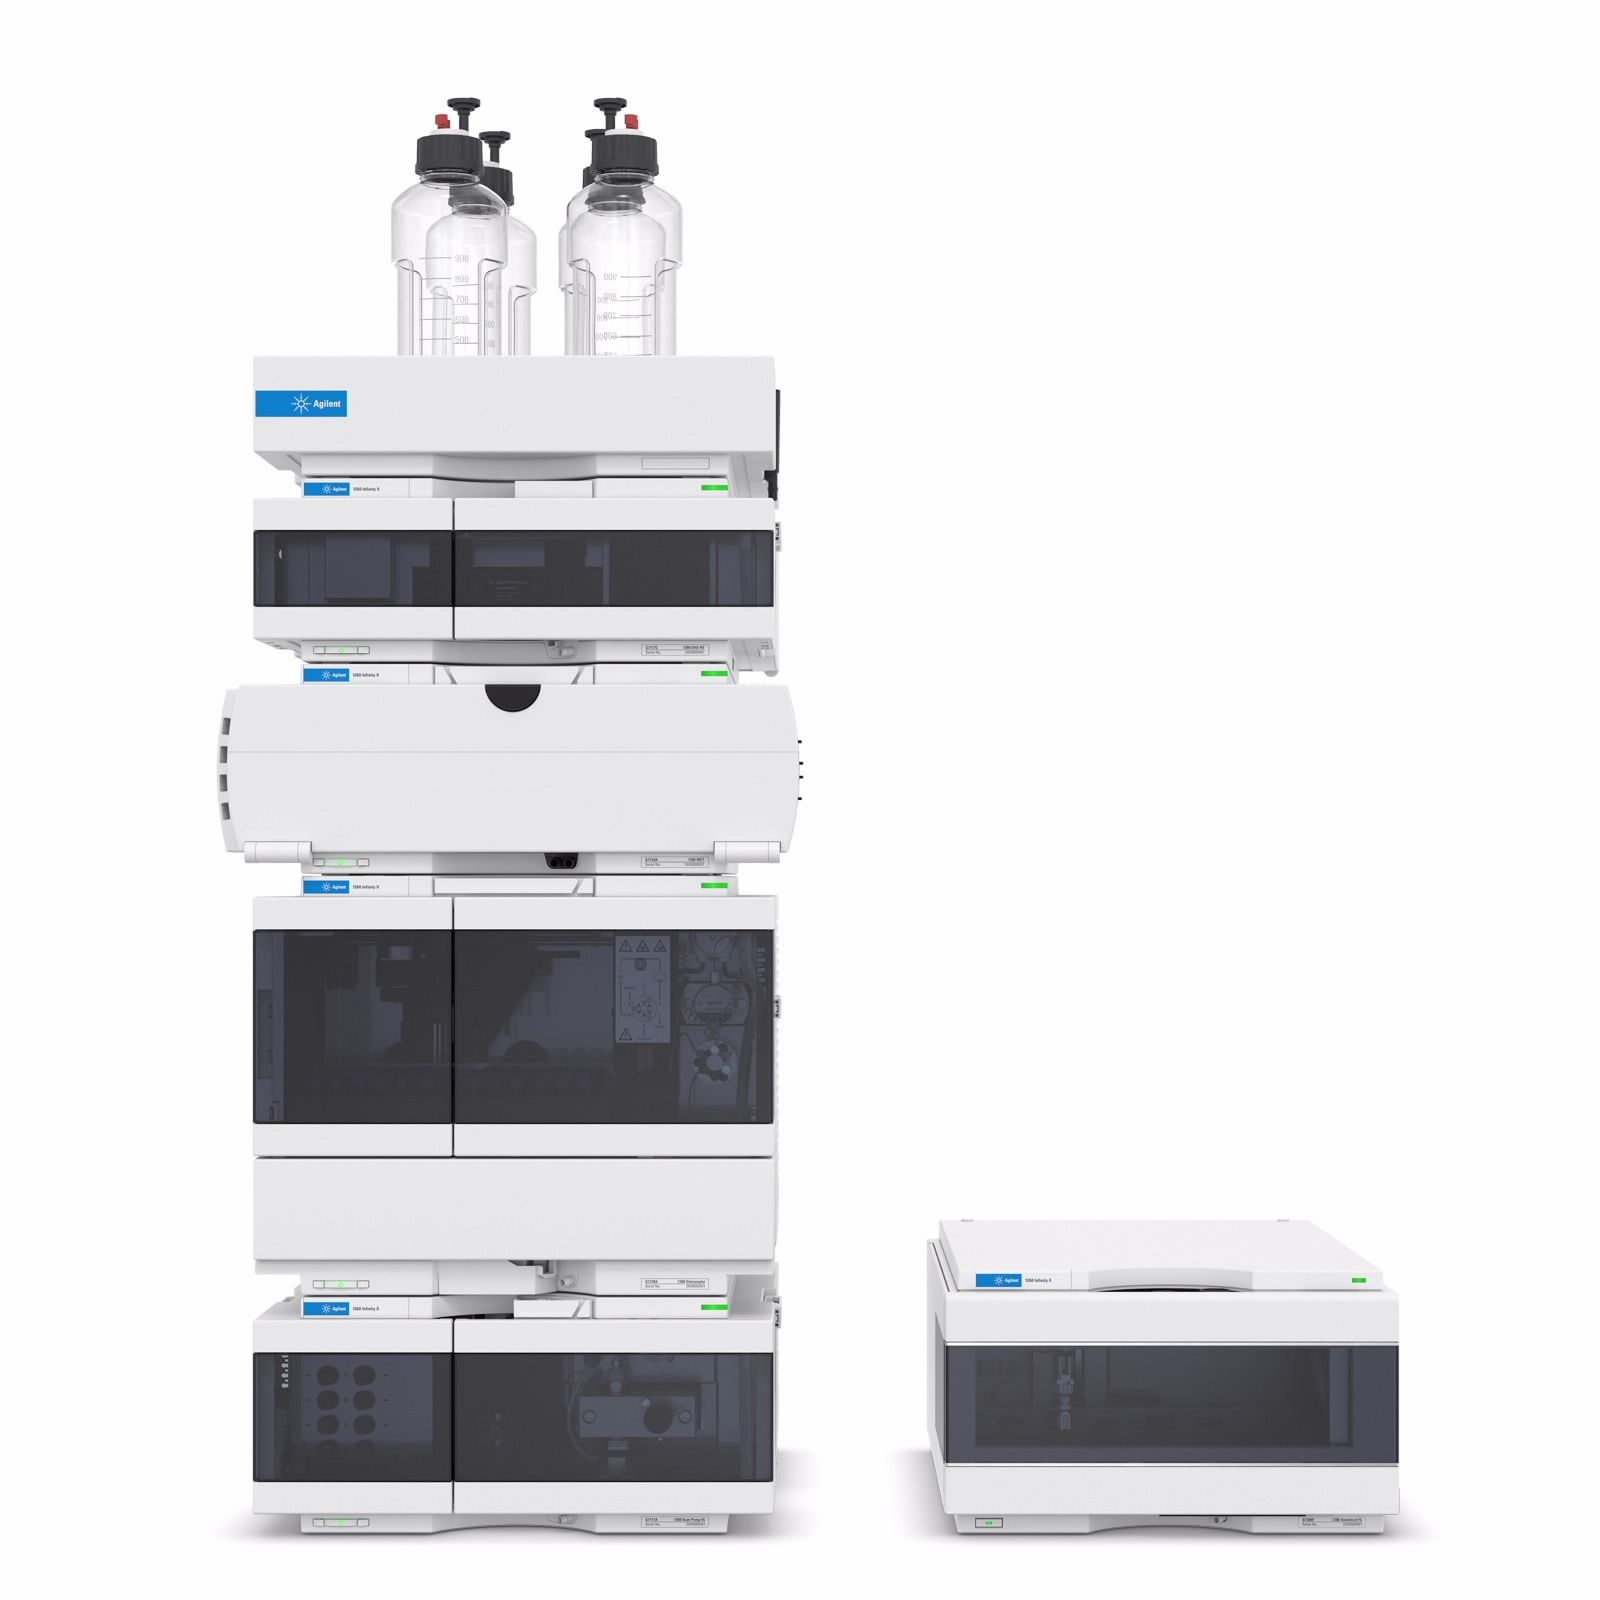 Agilent 1260 Infinity II Analytical-Scale LC Purification System